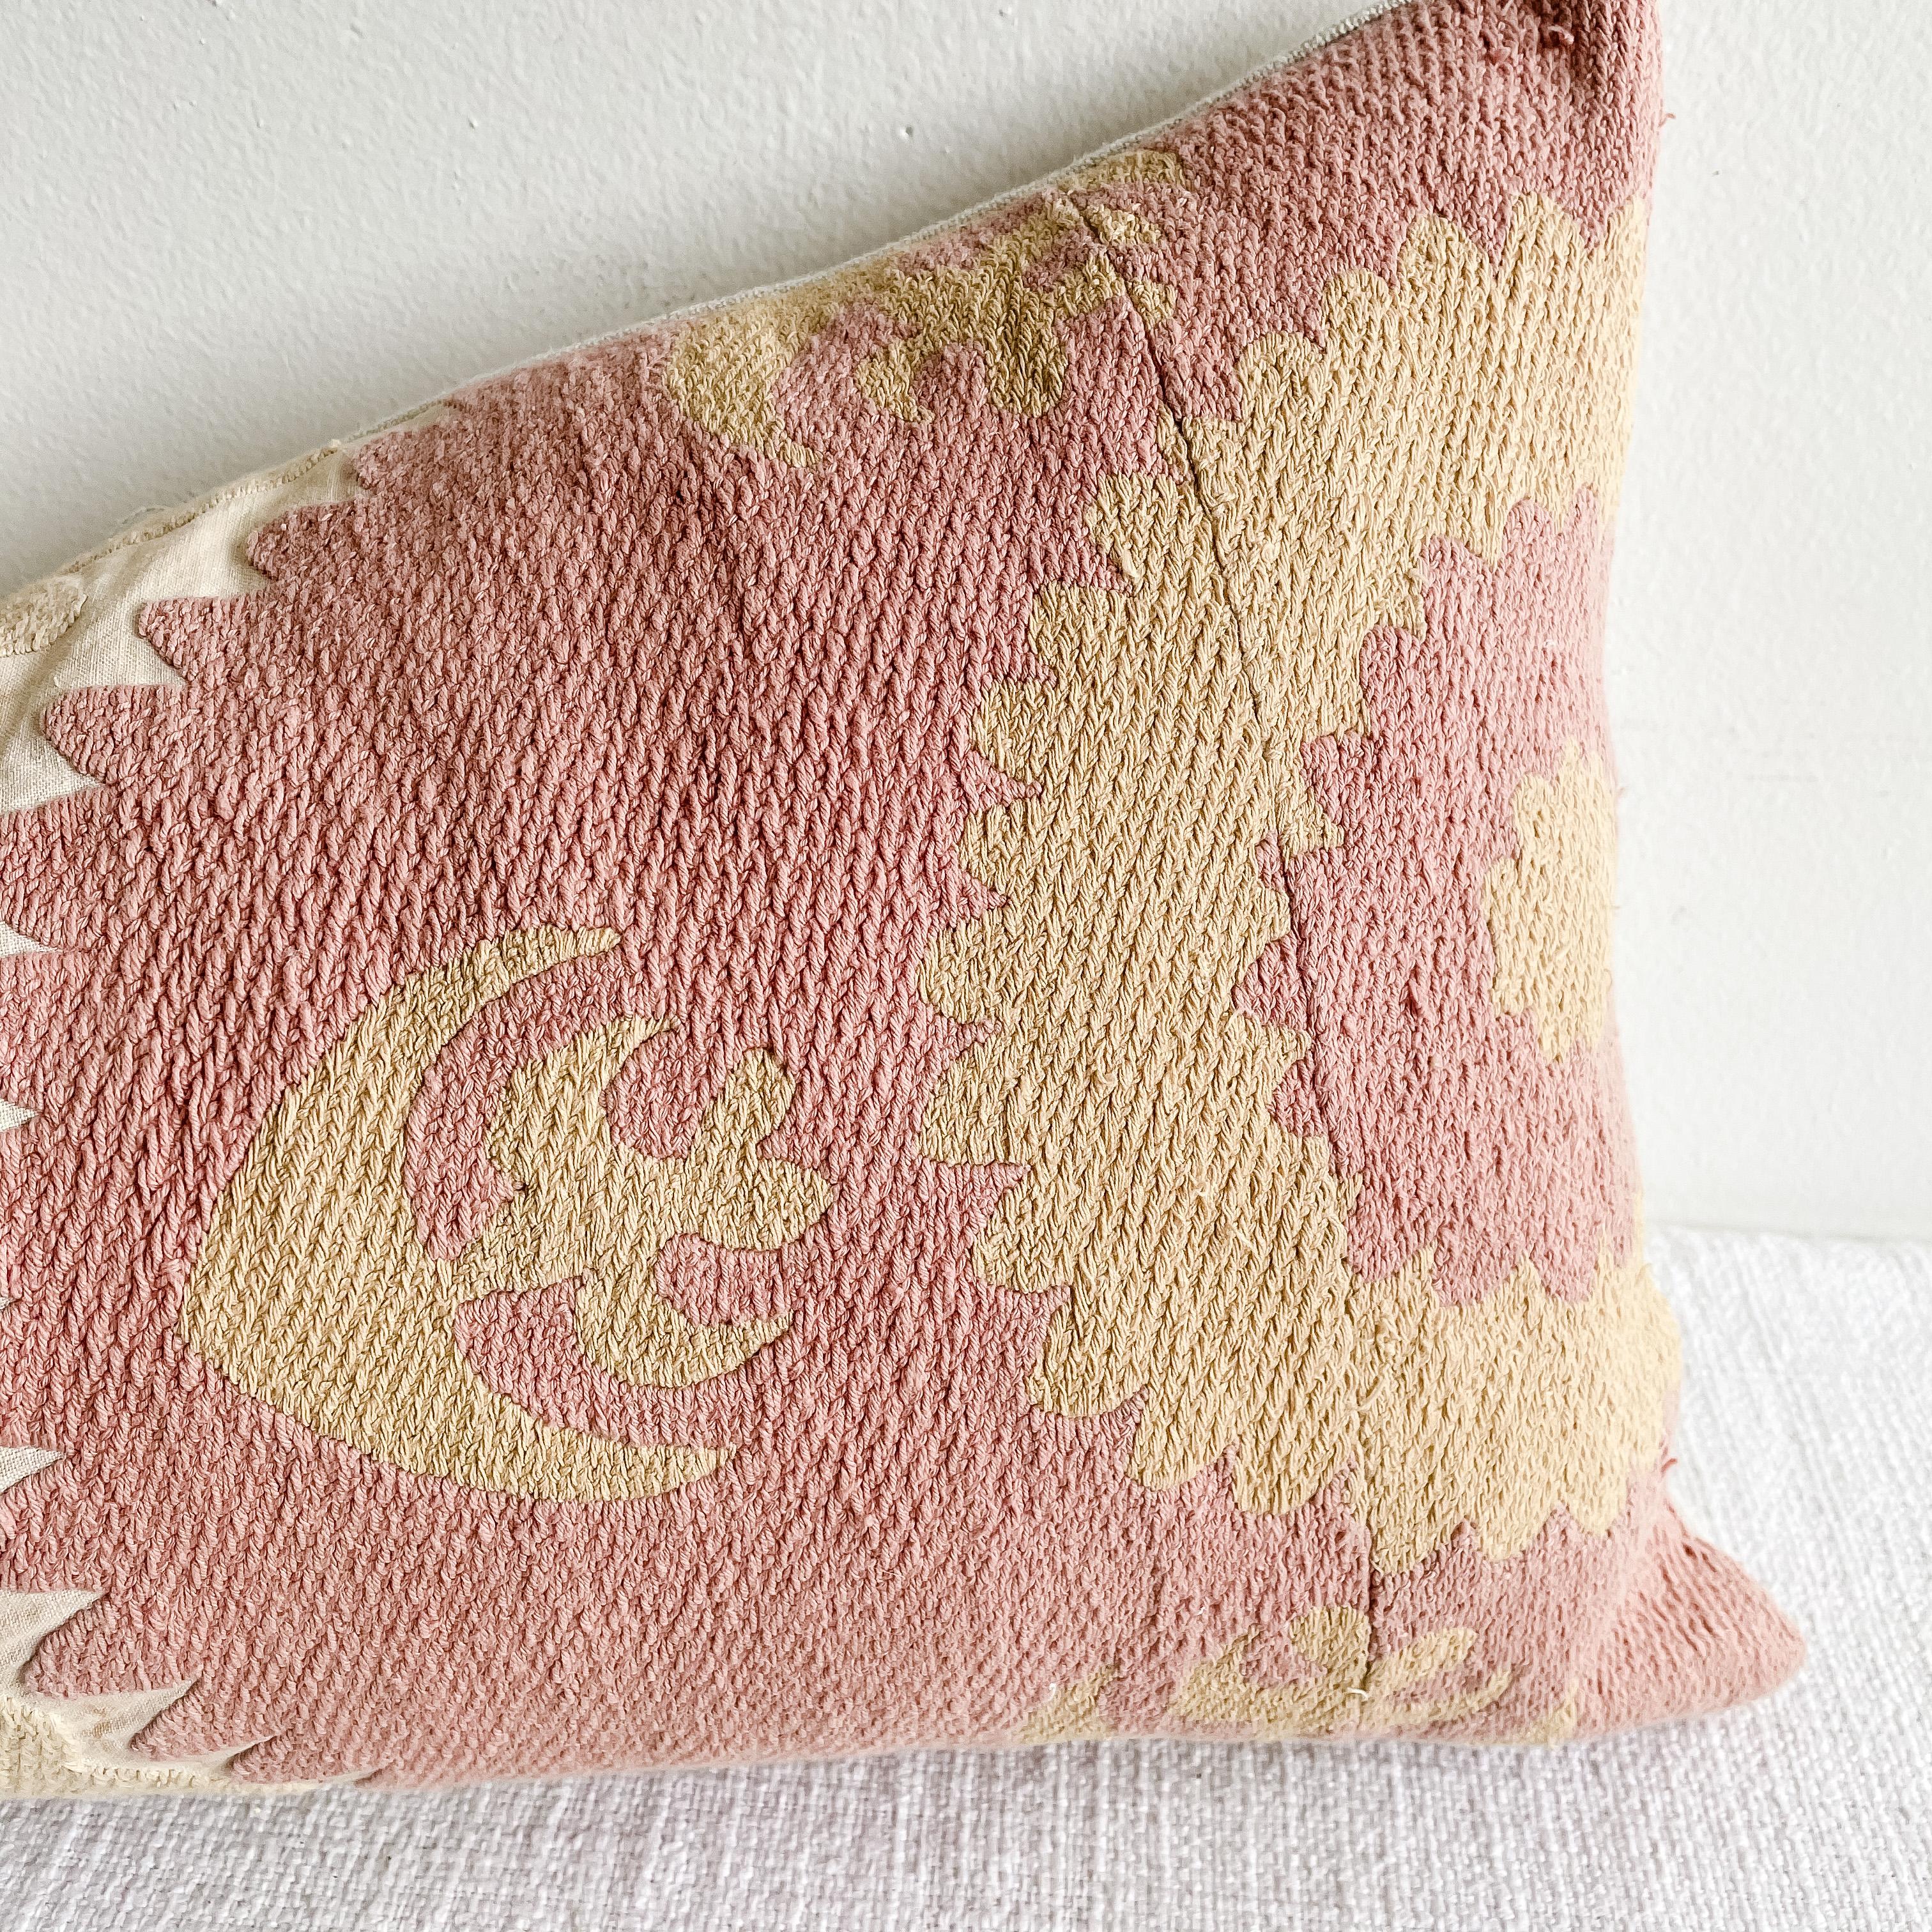 20th Century Vintage Pink and Tan Embroidered Suzani Pillow with Down Feather Insert